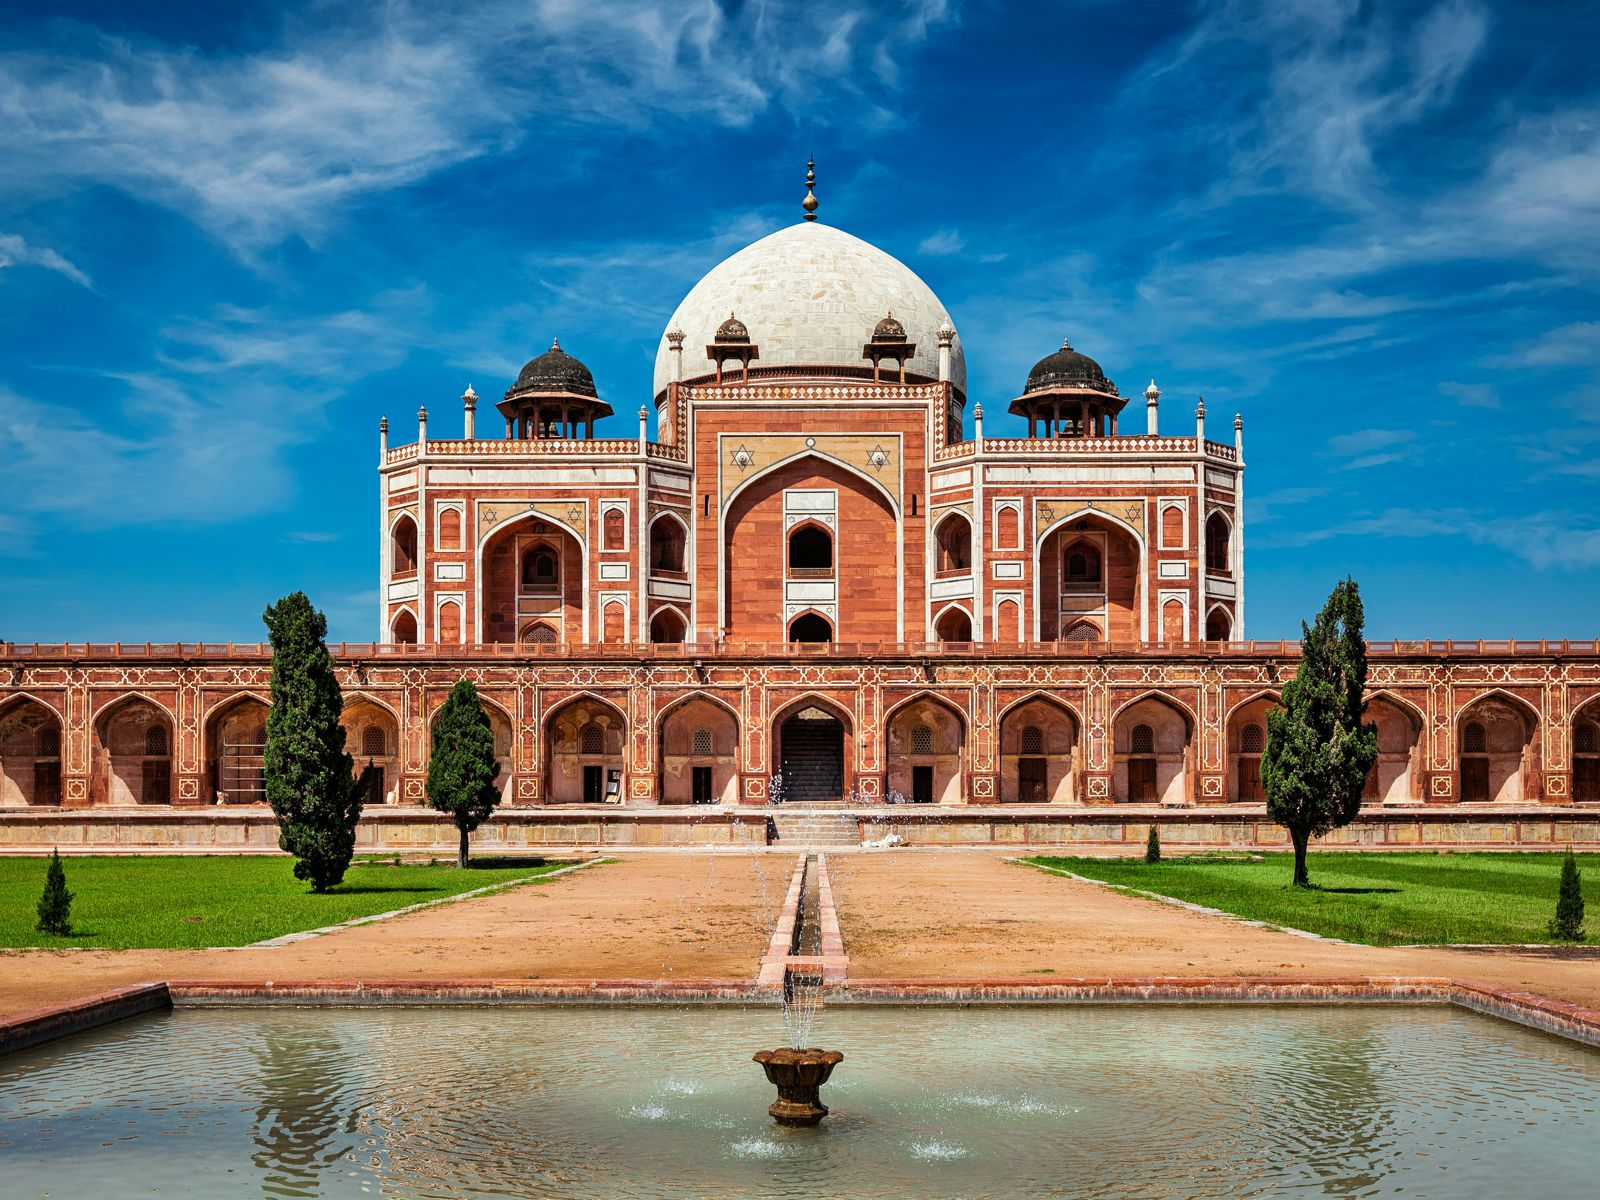 Trip to Delhi - Humayun's Mausoleum in Delhi, India, a magnificent red sandstone and marble structure under a clear blue sky.